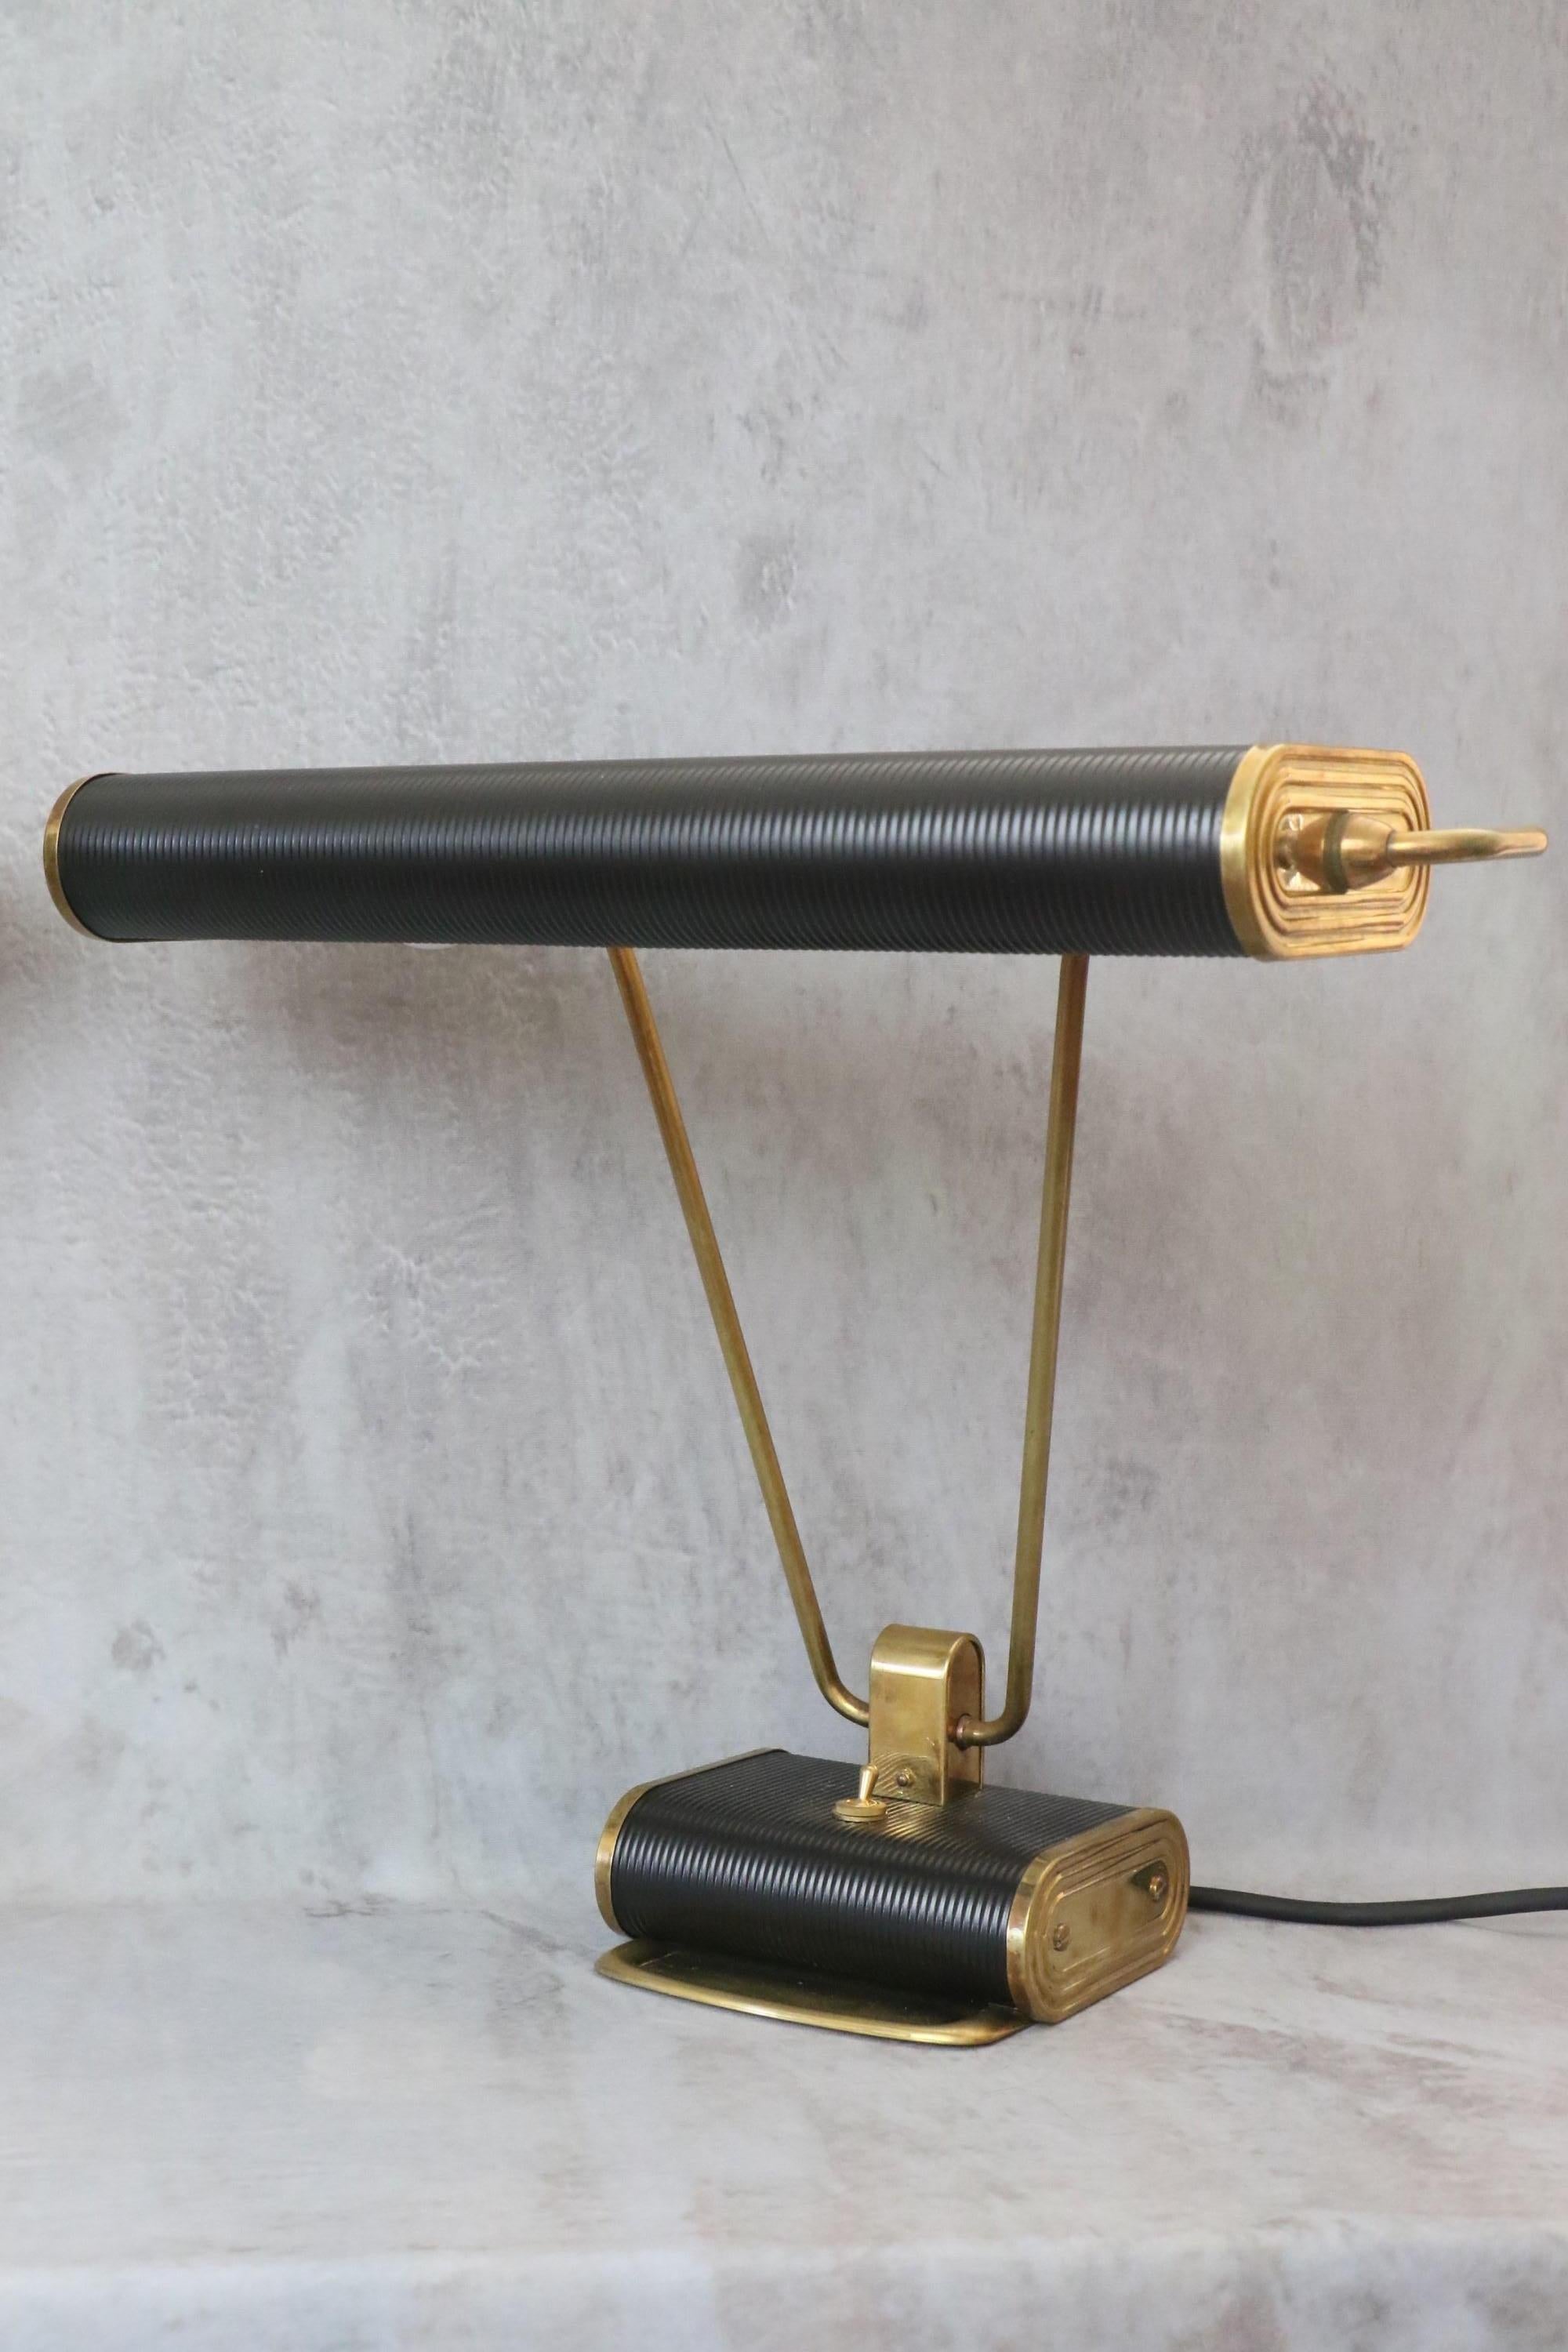 Eileen Gray Mid-century desk lamp for Jumo era Corbusier Perriand, 50's

Iconic model of the House Jumo, it is the model n°71 first edition circa 1950. It is attributed to the Irish designer Eileen Gray.
The lamp is in black lacquered folded sheet